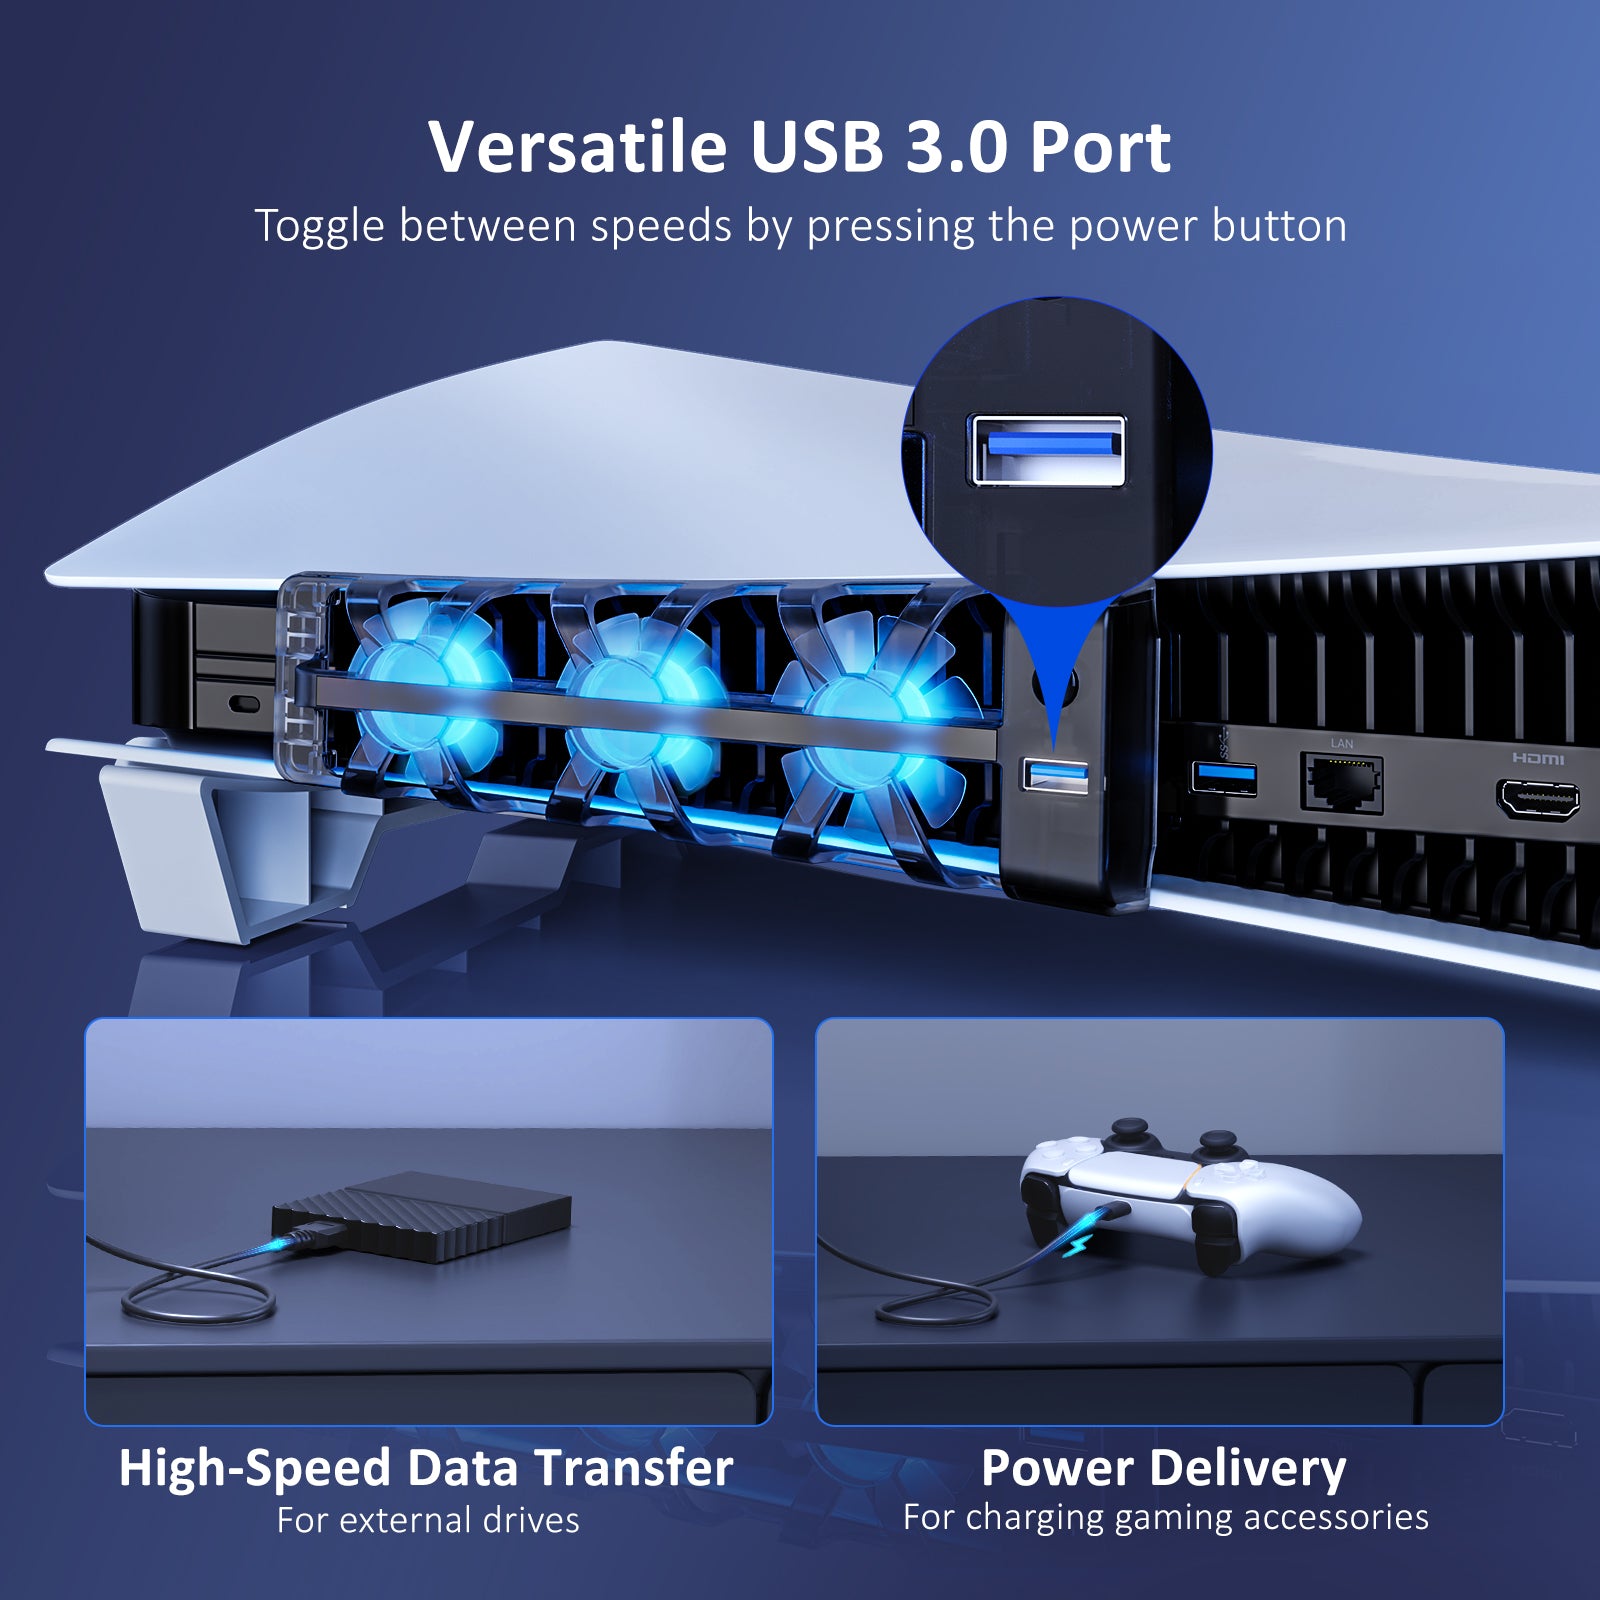 The USB 3.0 Port can transfer data for external drives and deliver power to the game controller.